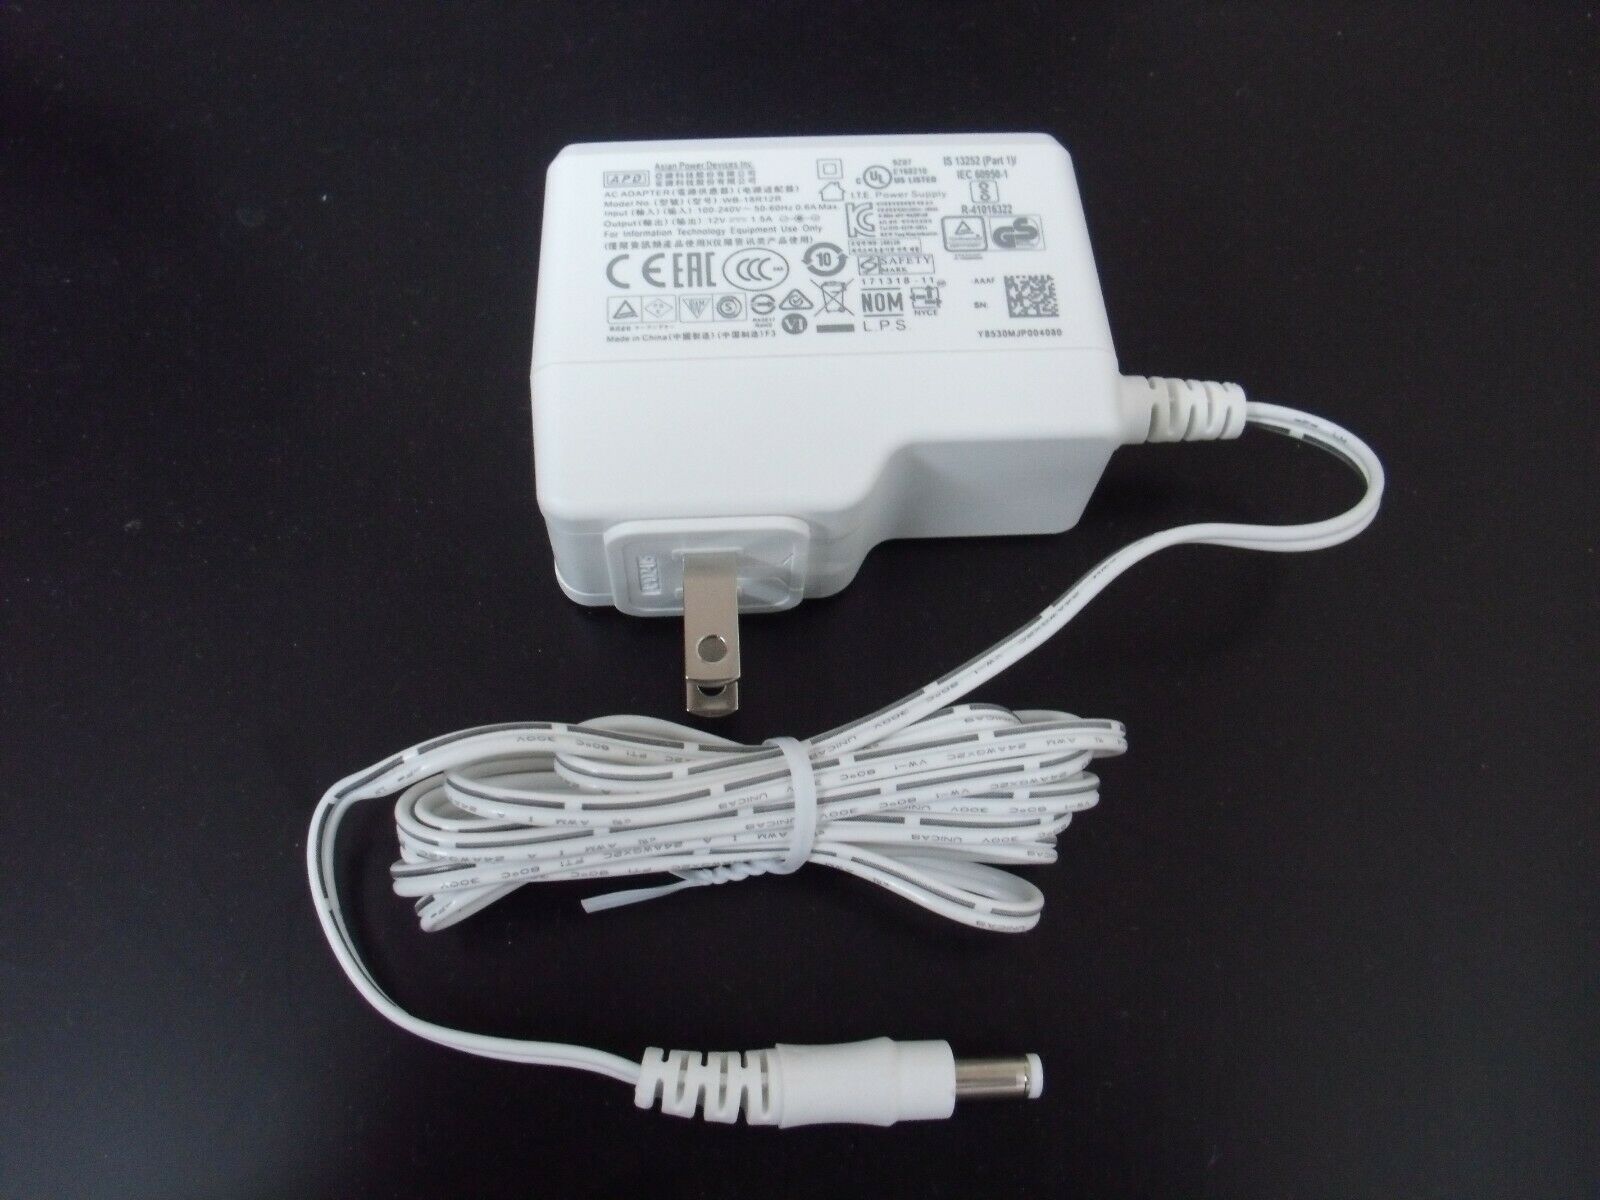 AC DC Power Supply Adapter Charger APD WB-18R12R White (4 Plugs) 12V 1.5A USA Connection Split/Duplication: 1:4 Type: